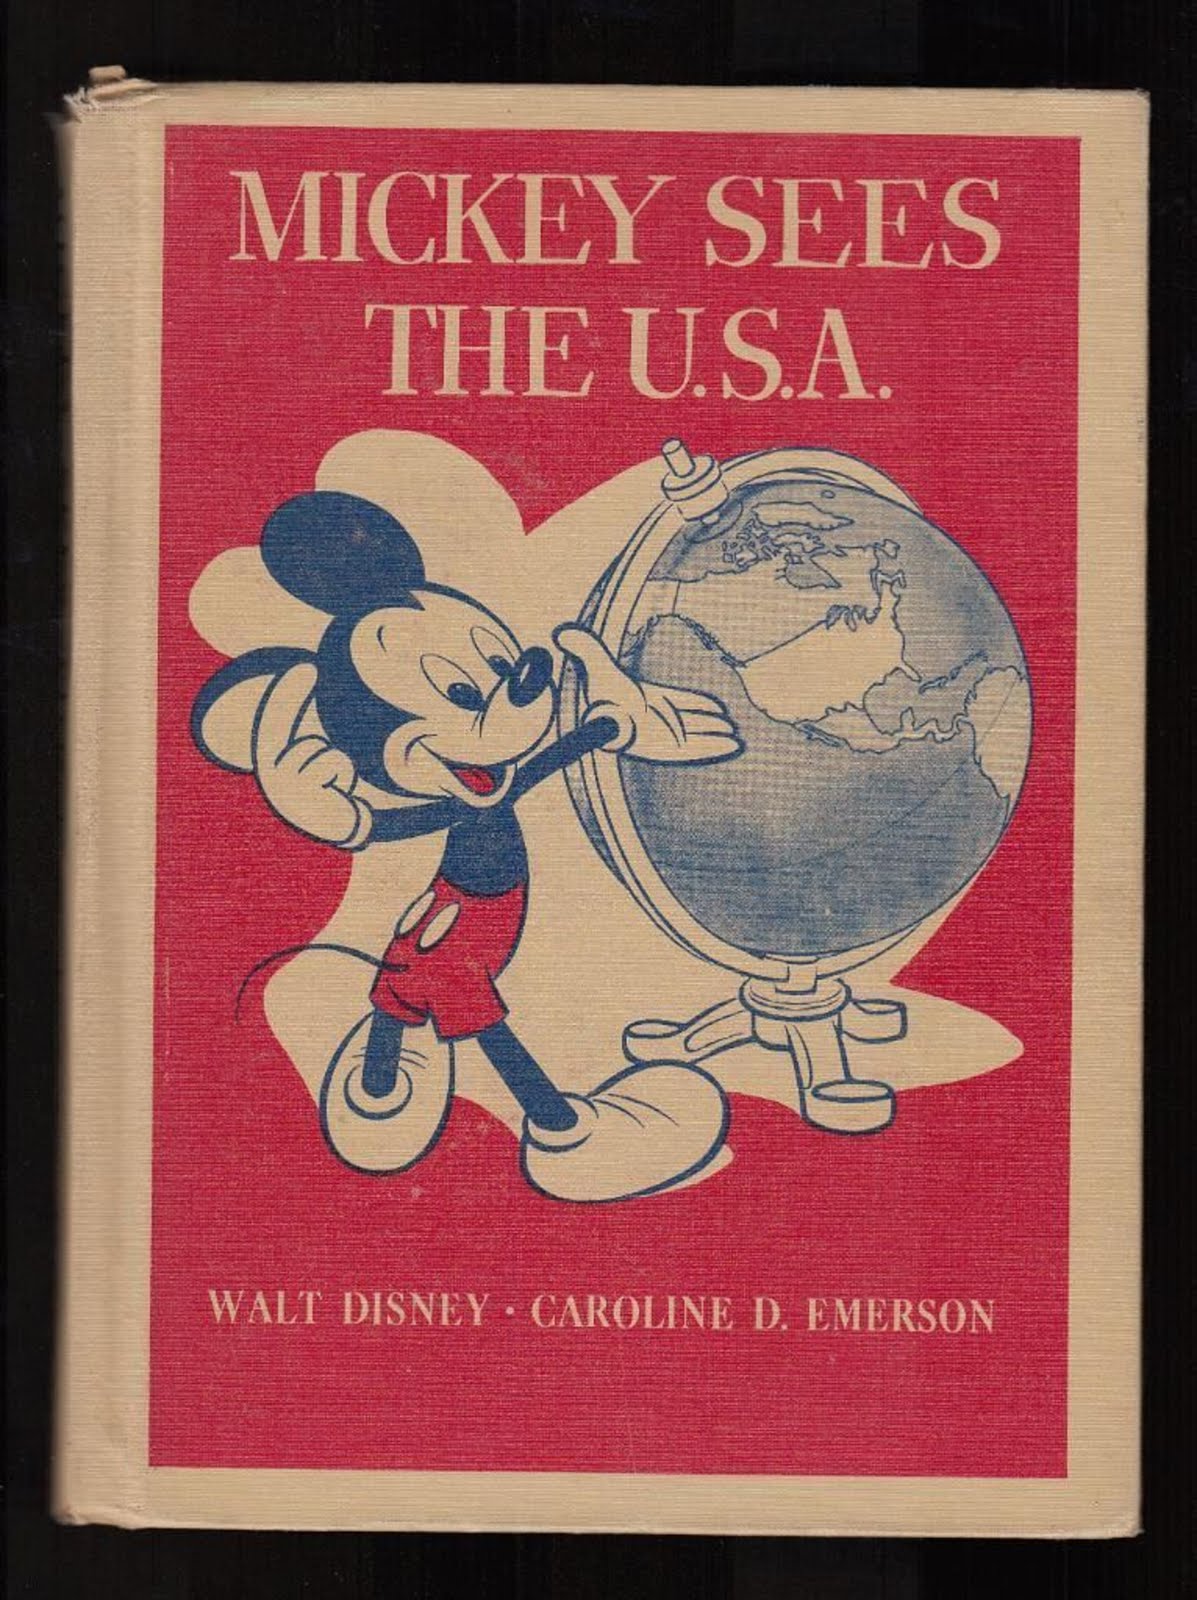 MICKEY SEES THE USA